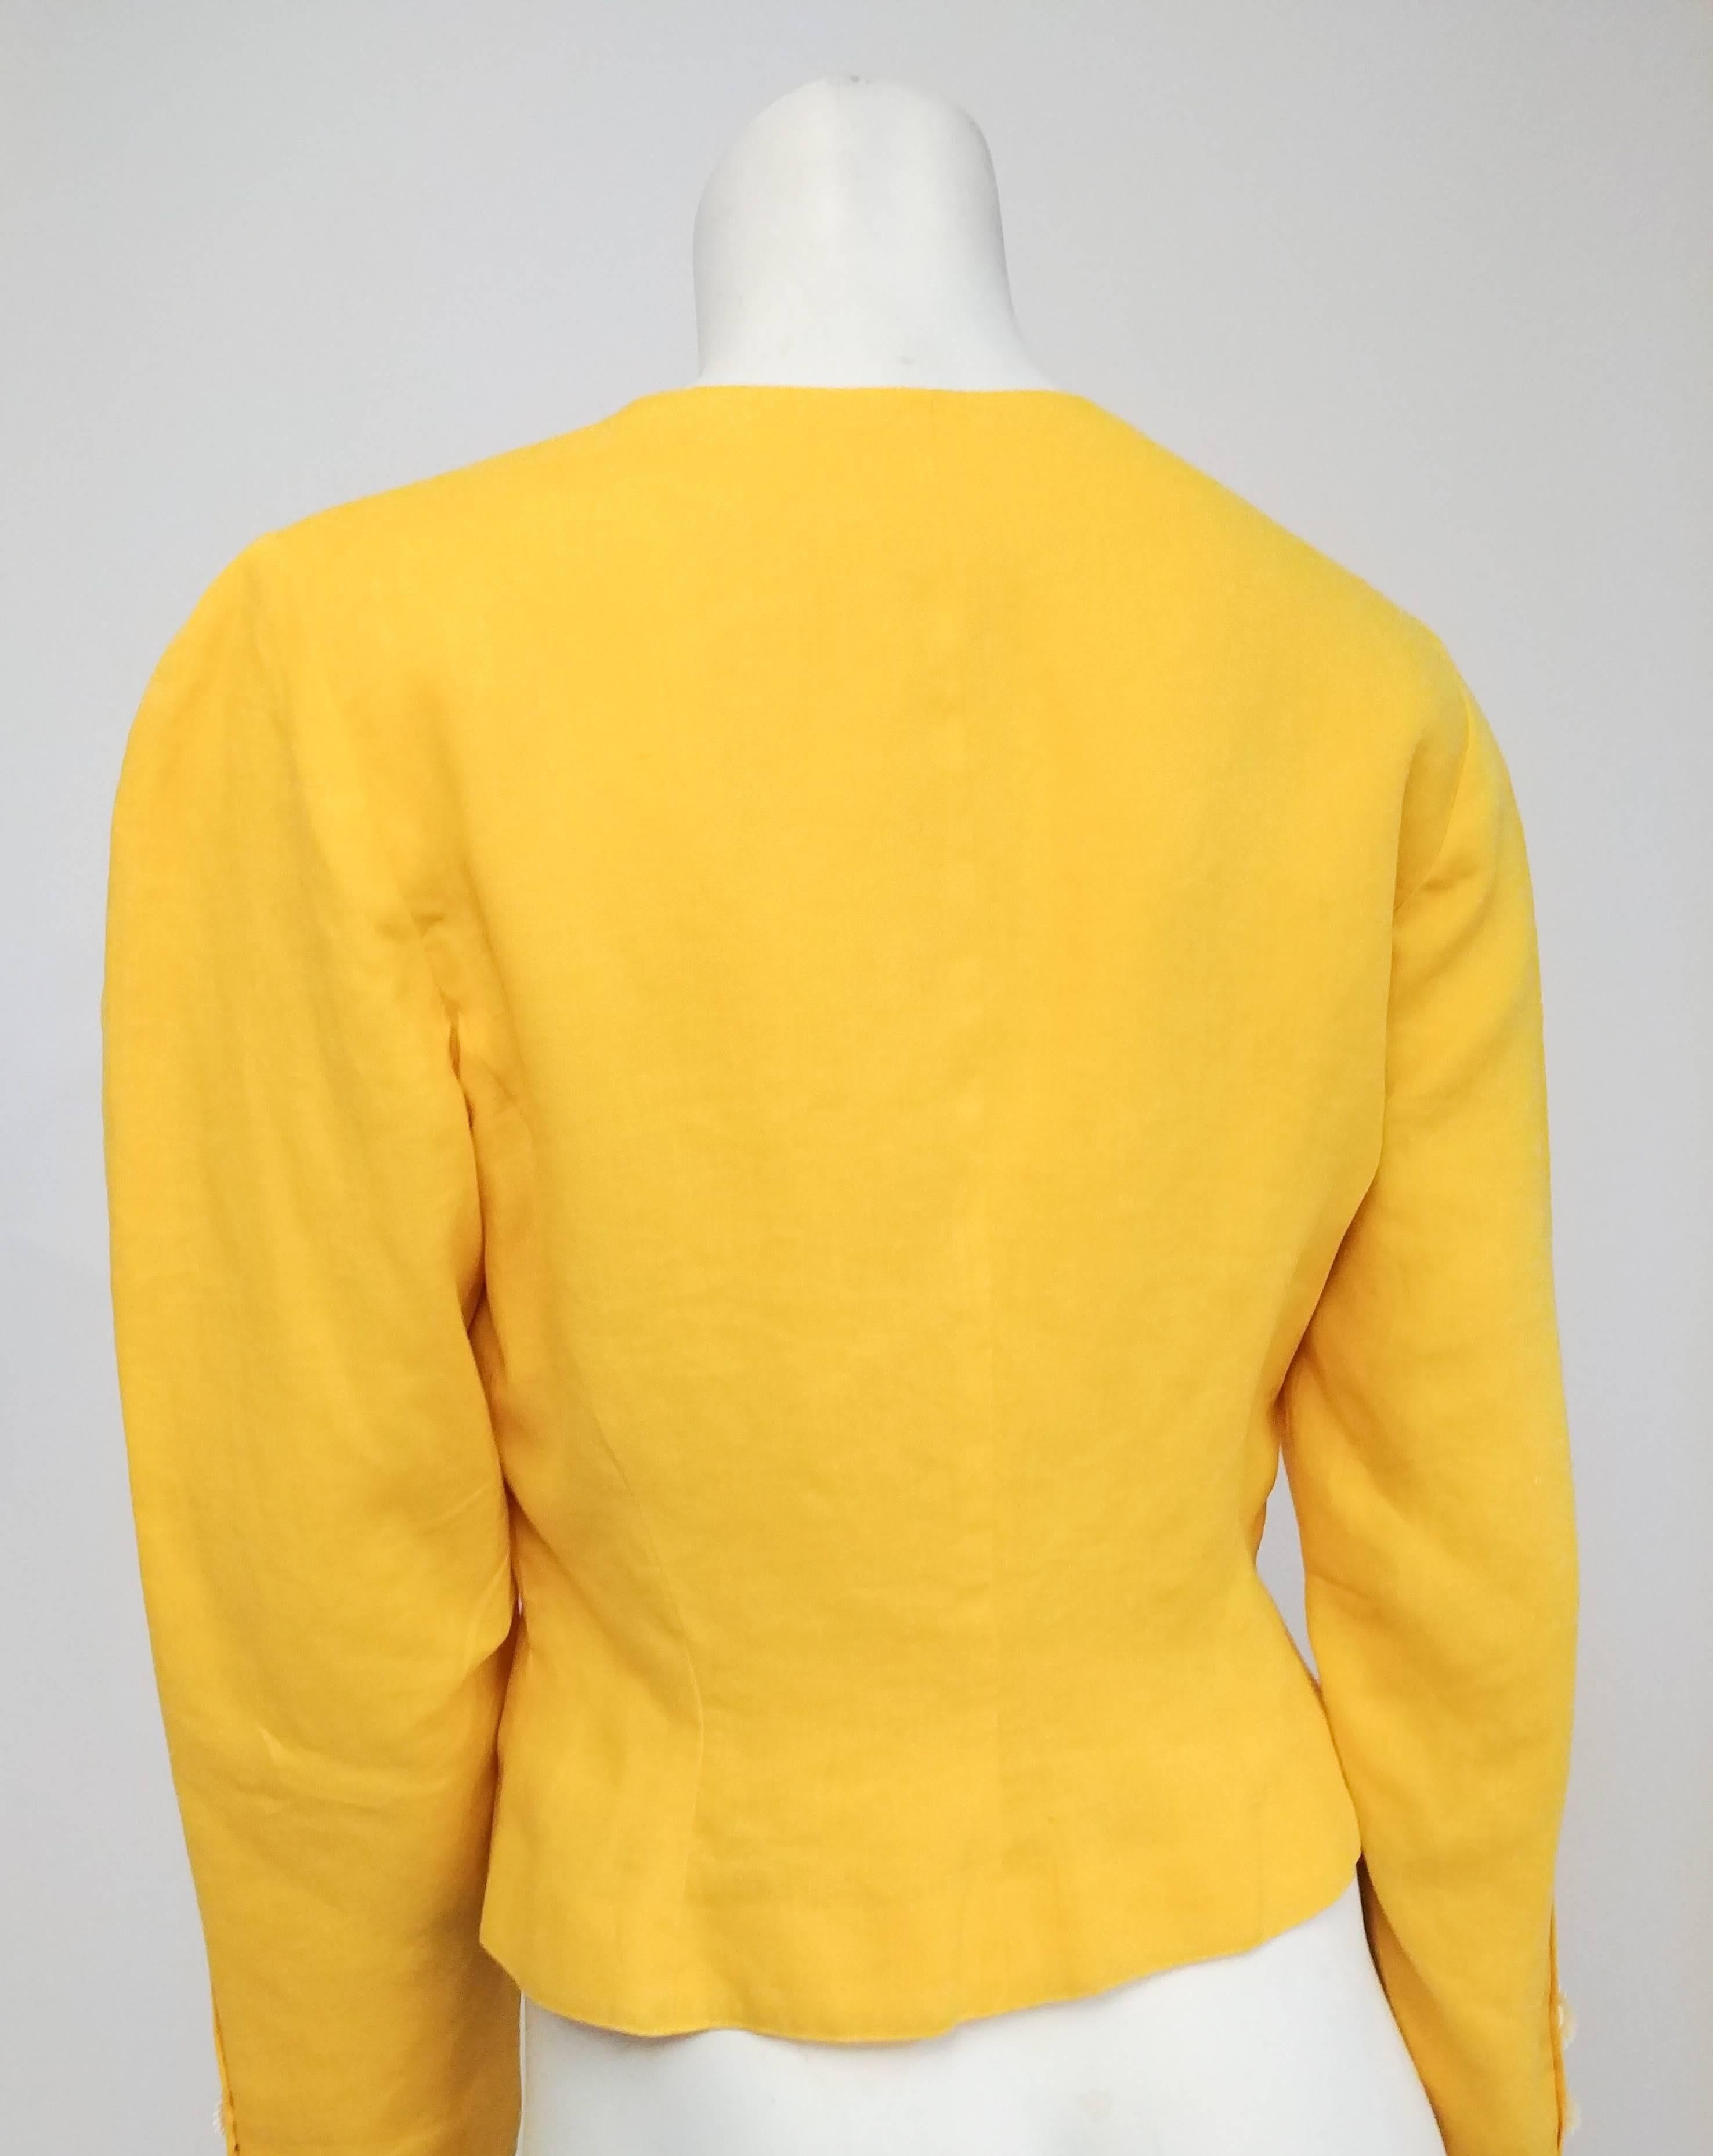 1980s Cacharel Daisy Yellow Linen Top. Scoop neck top with white daisy buttons at front and cuffs. 